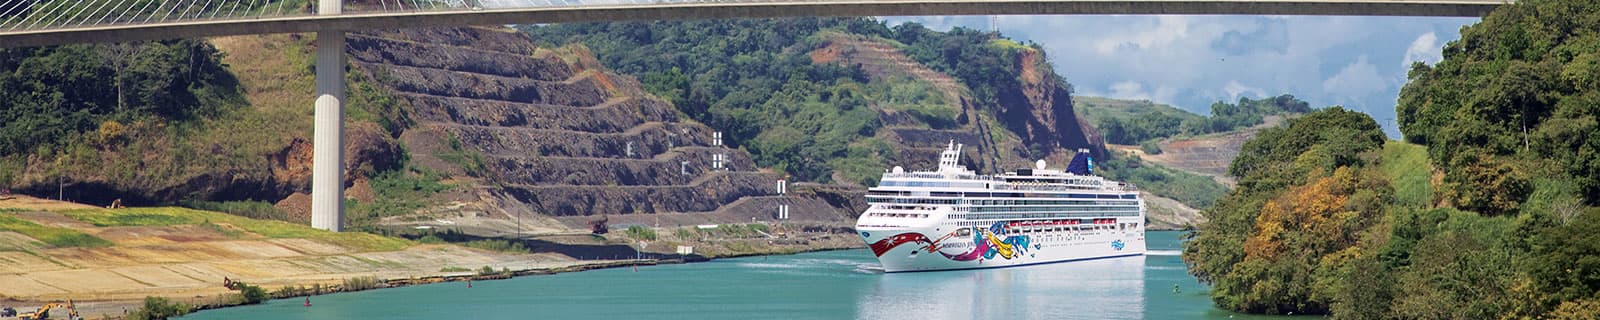 cruise panama canal from san diego